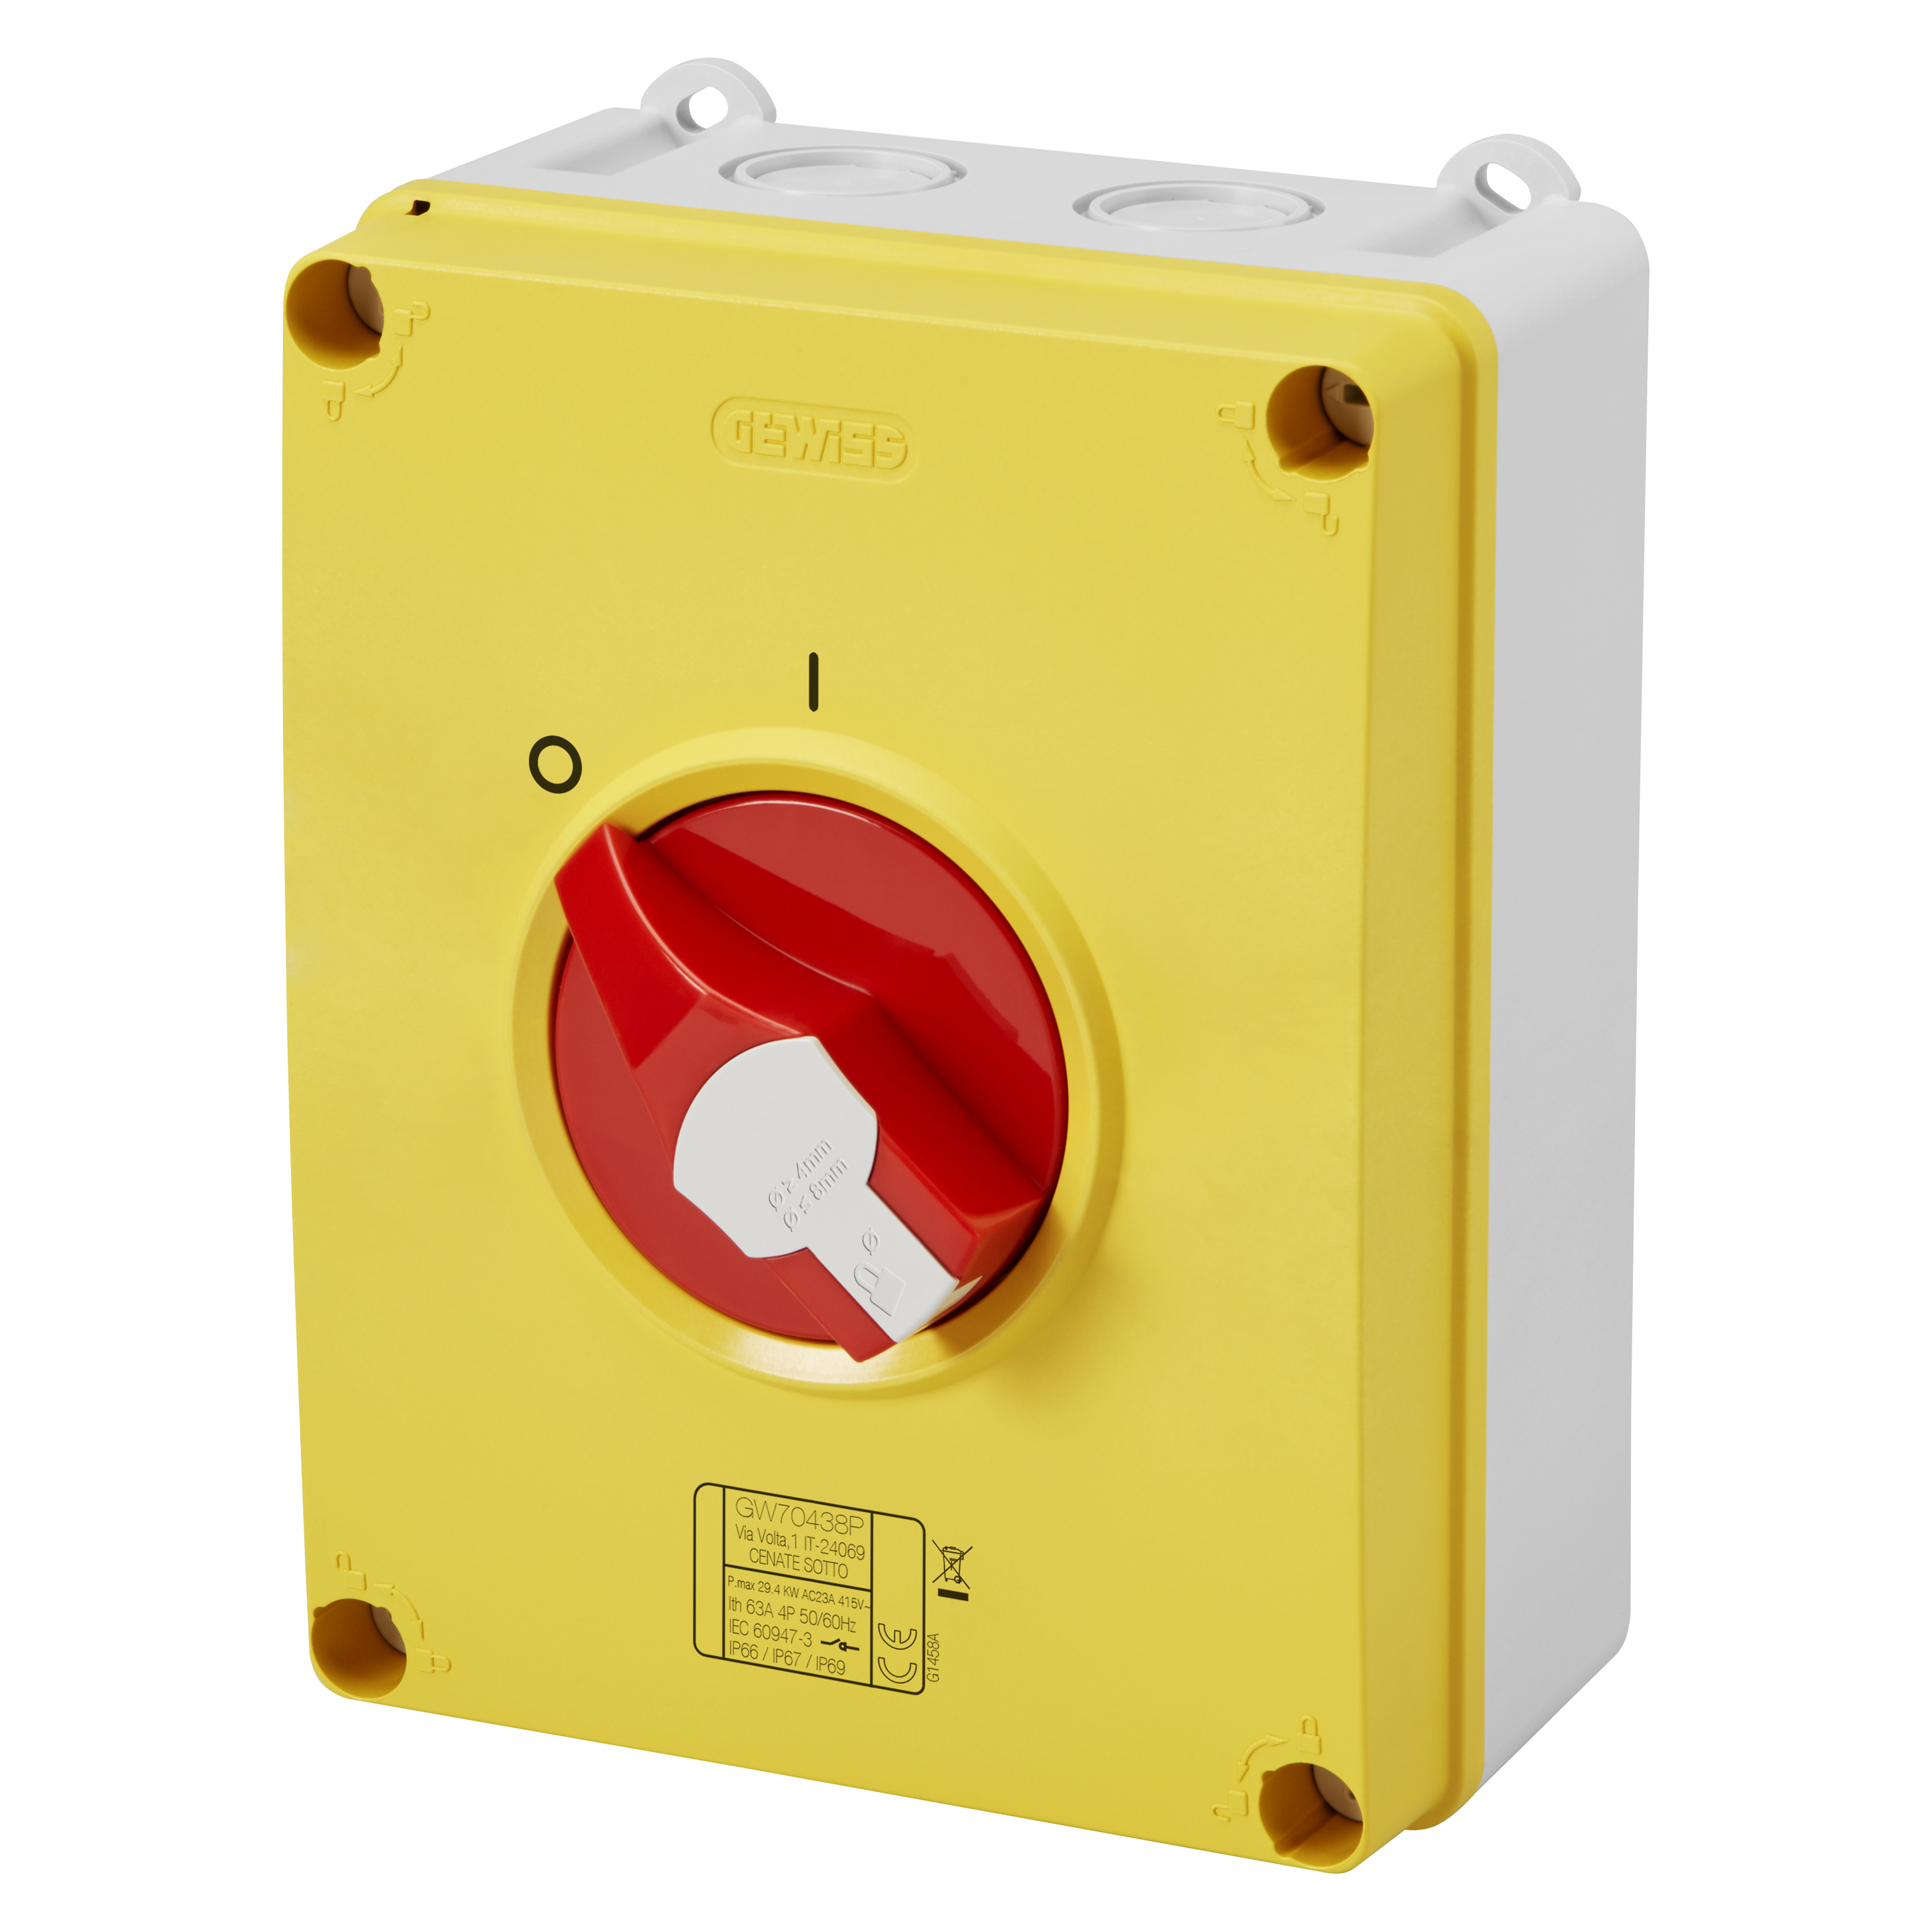 GW70438P Isolator - HP - Emergency - Isolating Material Box - 63A 4P - Lockable Red Knob - IP66/67/69